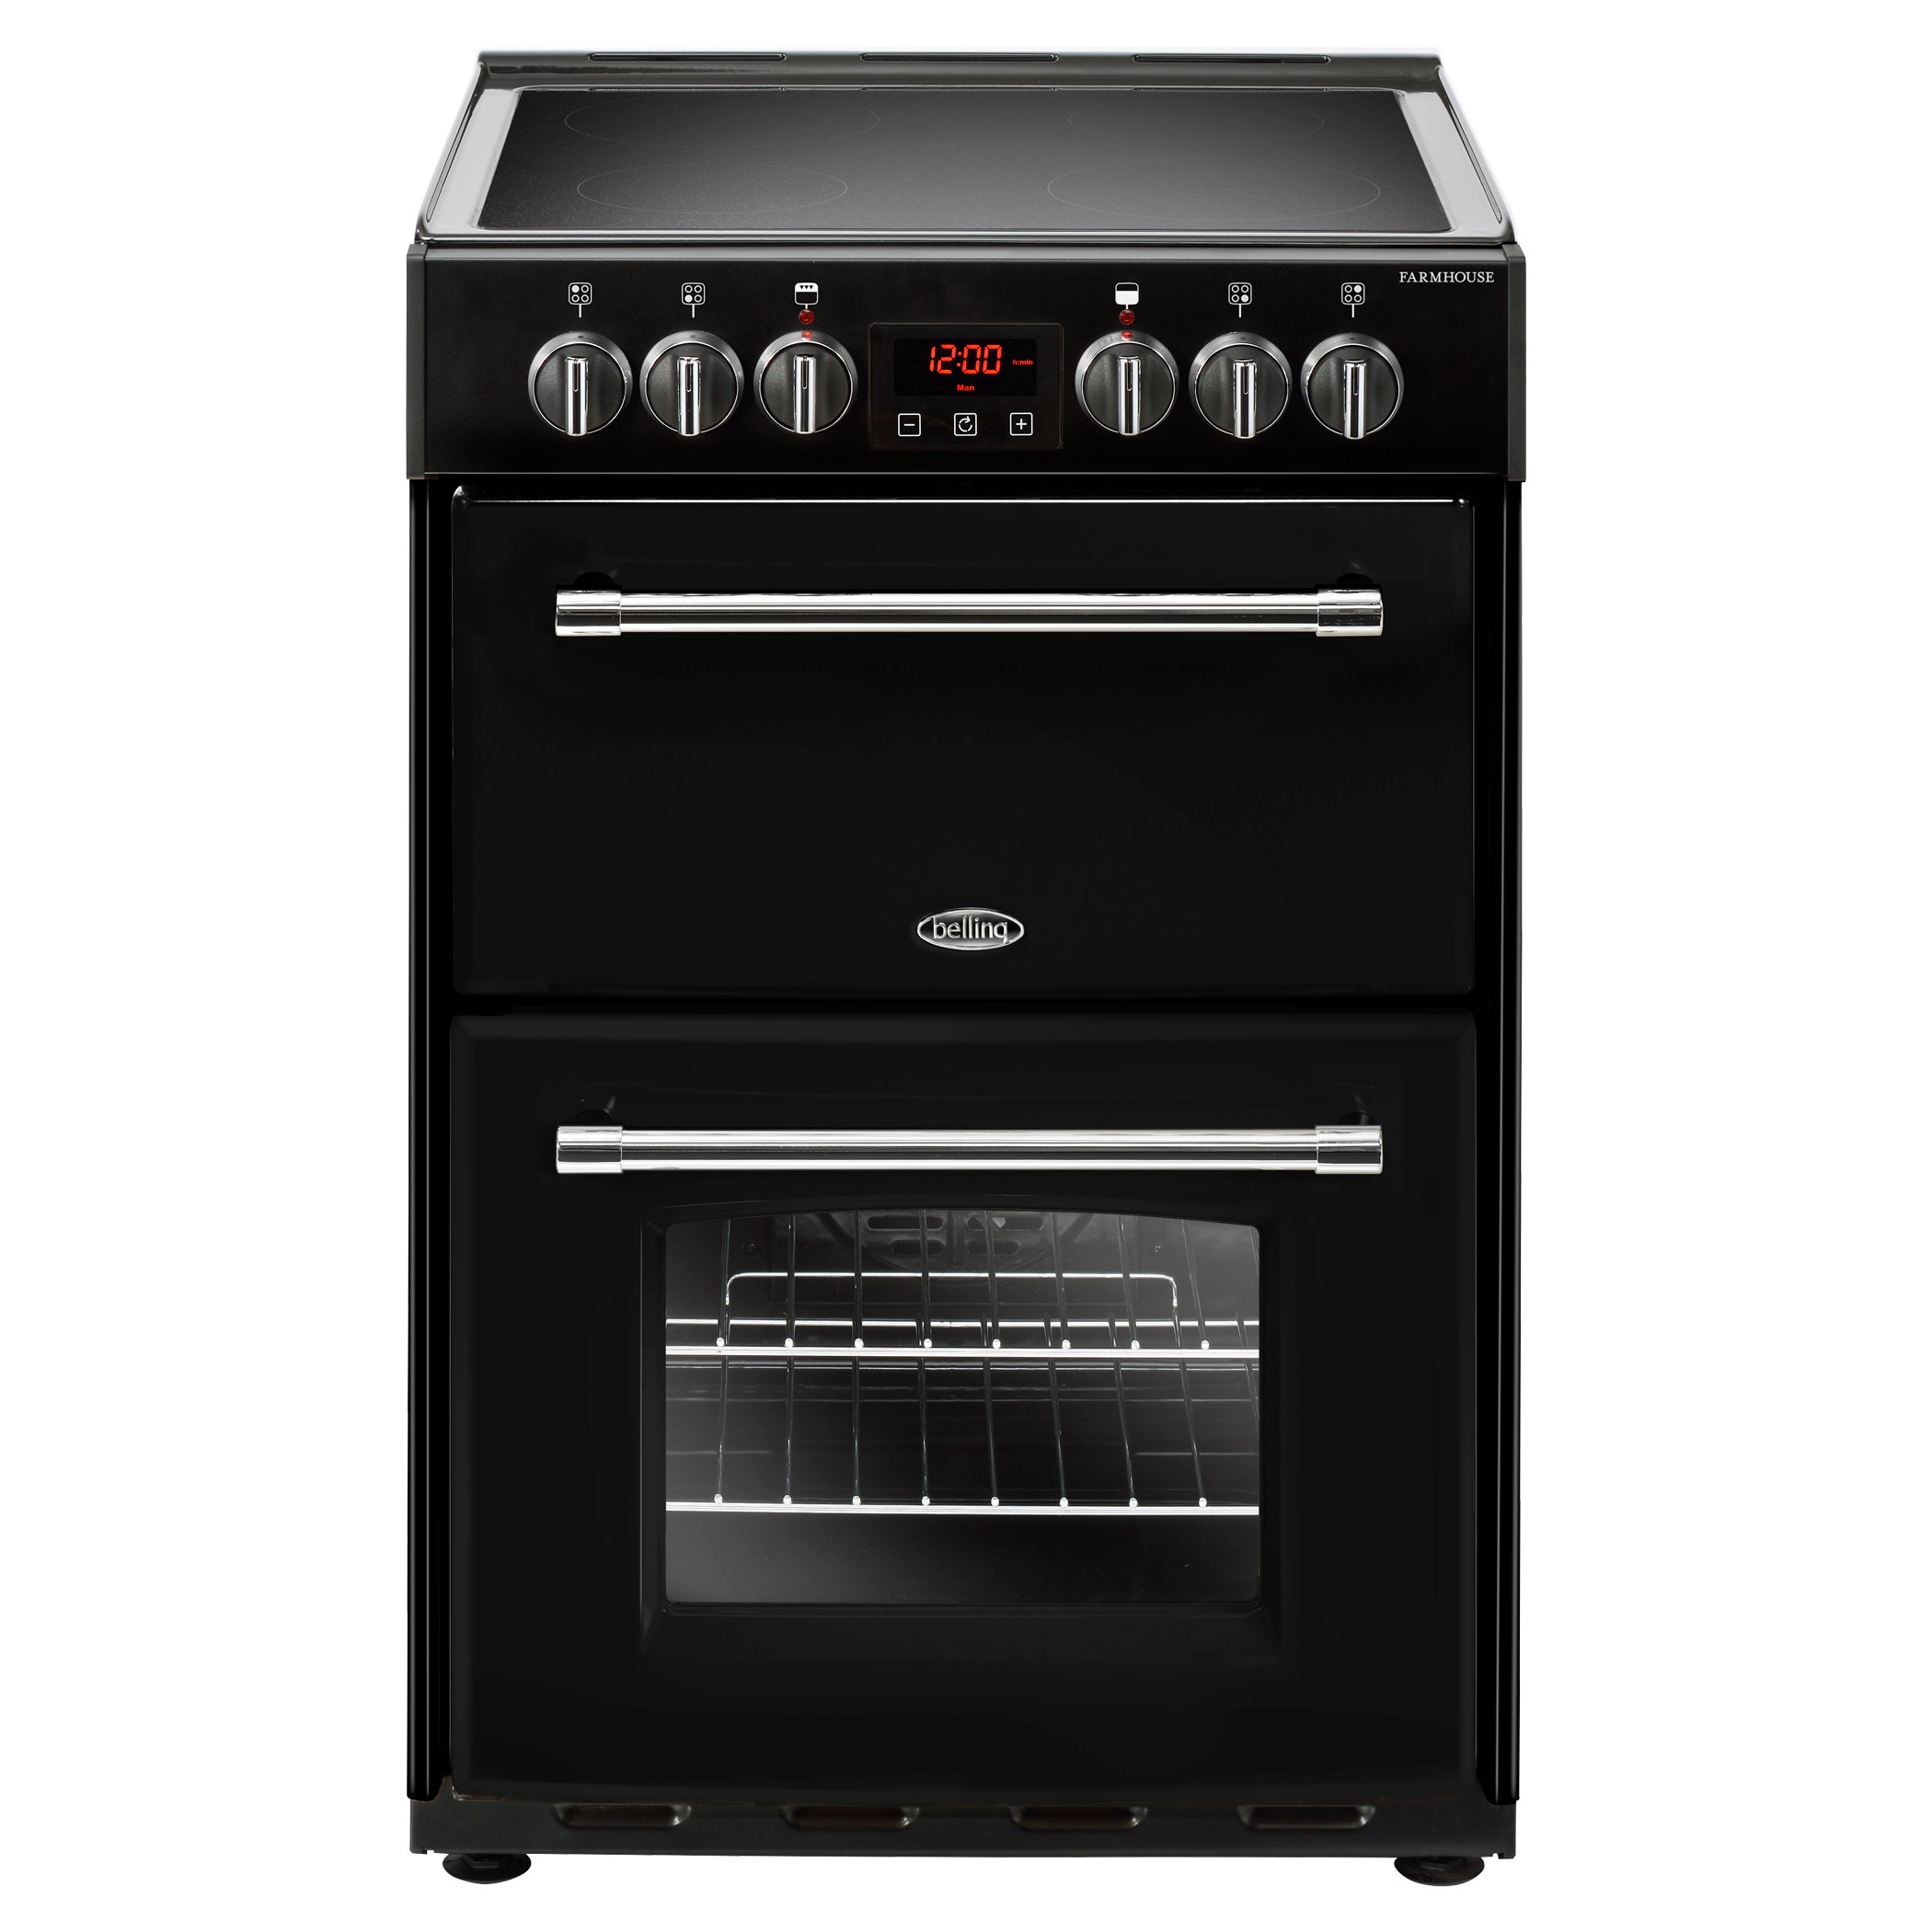 60cm Electric Range Cooker With A 4 Zone Electric Ceramic Hob, Conventional Oven & Grill and Fanned Main Oven